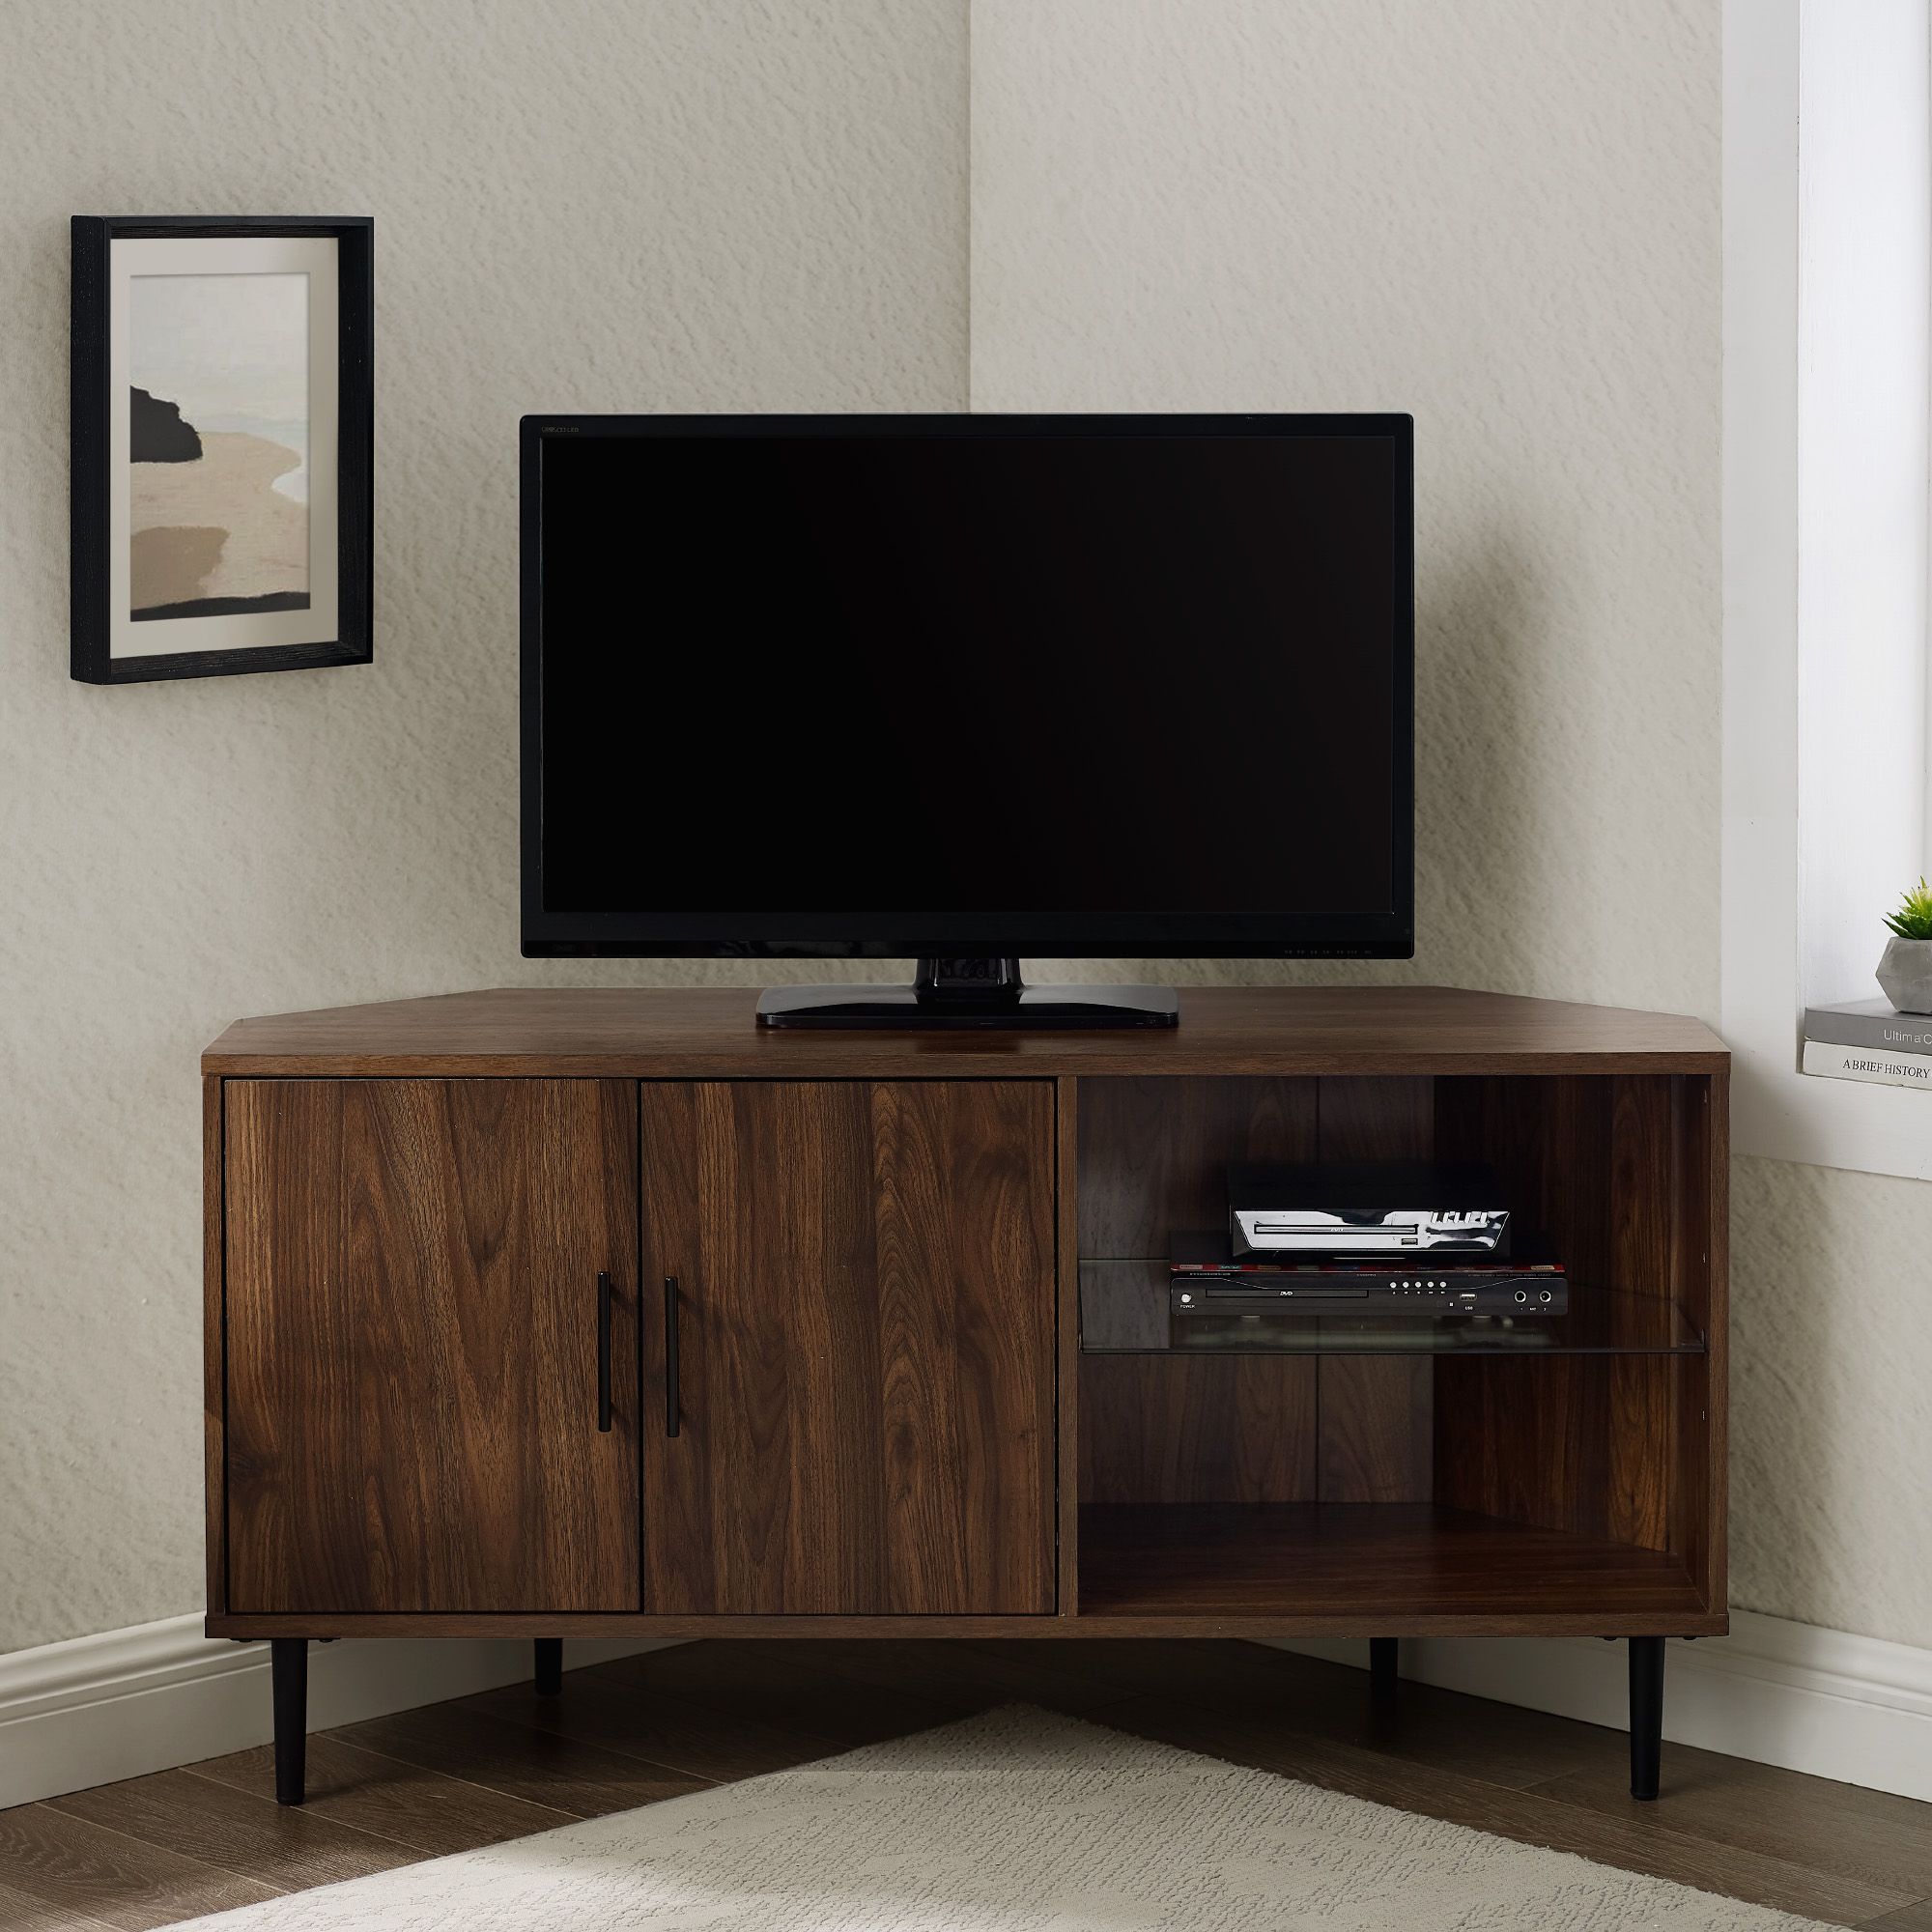 Manor Park Basie 2 Door Corner Tv Stand For Tvs Up To 55 For Twila Tv Stands For Tvs Up To 55" (Photo 7 of 15)